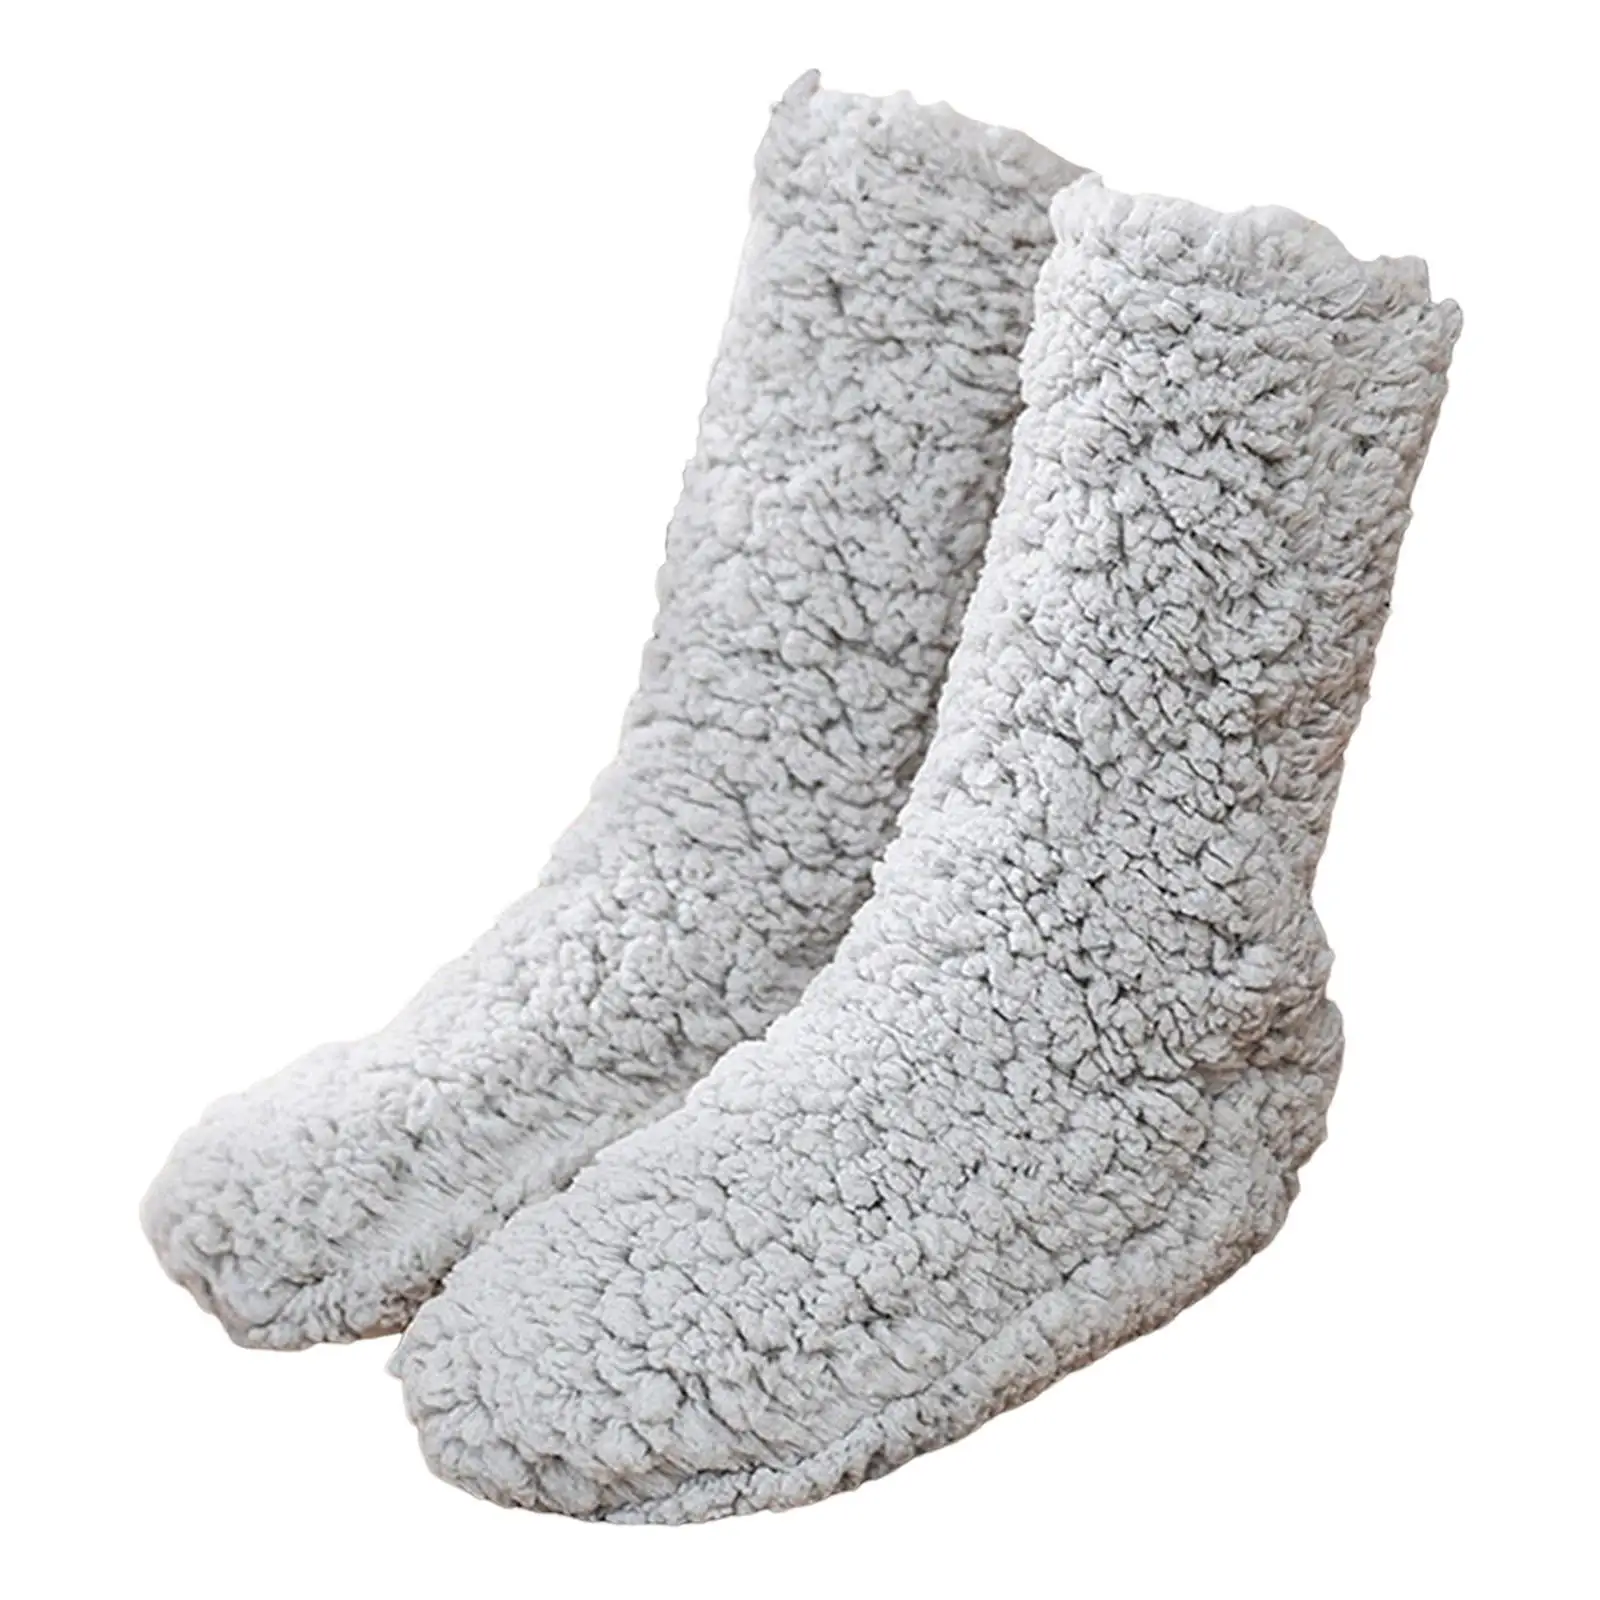 Women Winter Warm Socks Thermal Socks Home Slippers Thick Autumn Soft Non Slip Comfortable Casual Accessories